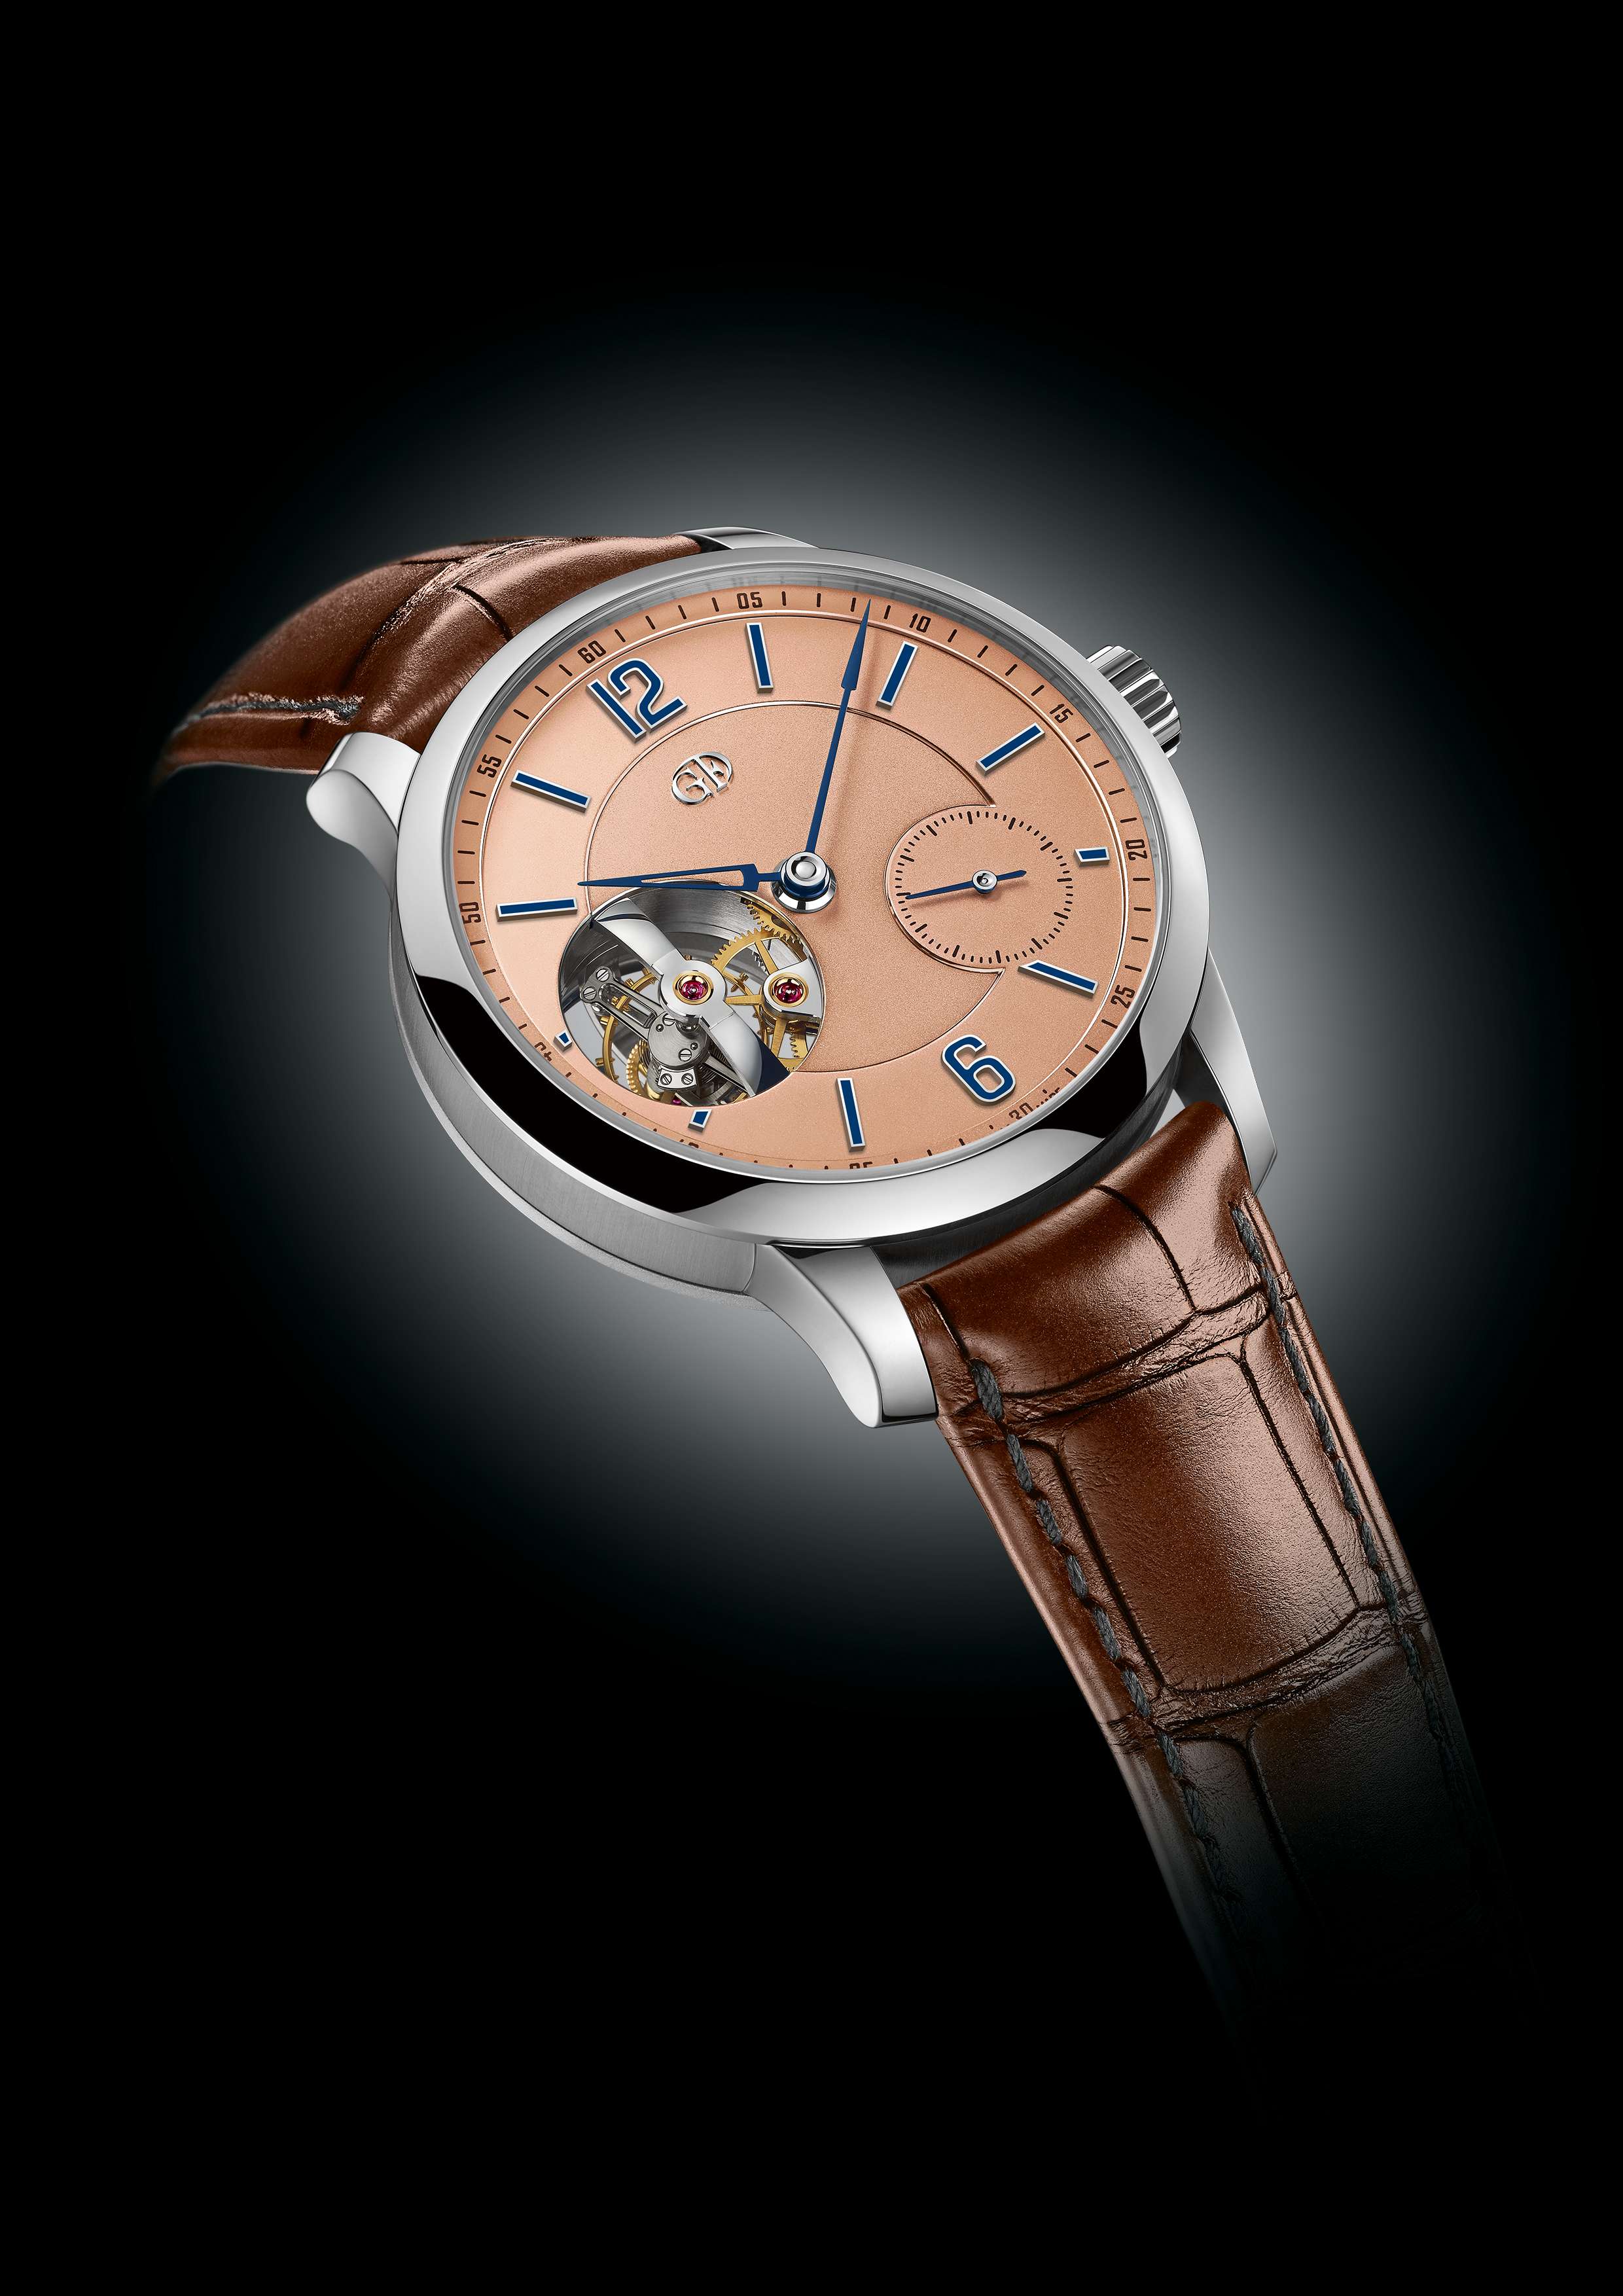 Greubel Forsey Tourbillon 24 Secondes is now available with an elegant salmon-coloured gold dial in a platinum case.